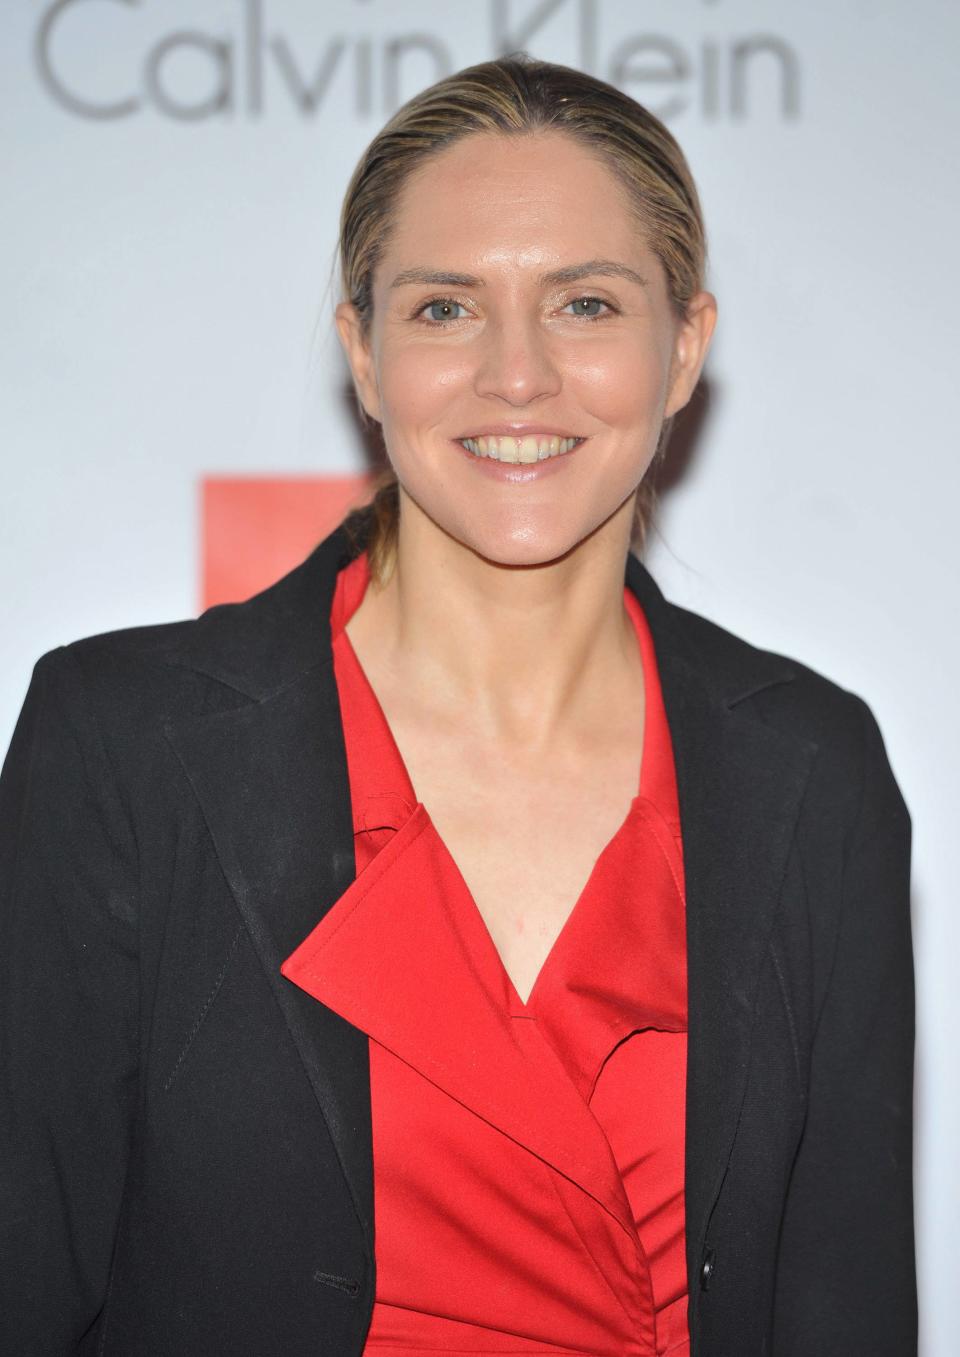 2. Louise Mensch was a Conservative MP for Corby from 2010 until she announced her shock resignation in August 2012. The former chick-lit author is married to Peter Mensch, the manager of Metallica and Red Hot Chili Peppers. After resigning from Parliament she moved to New York City to spend more time with him and their three children (Daniel Deme/WENN.com)